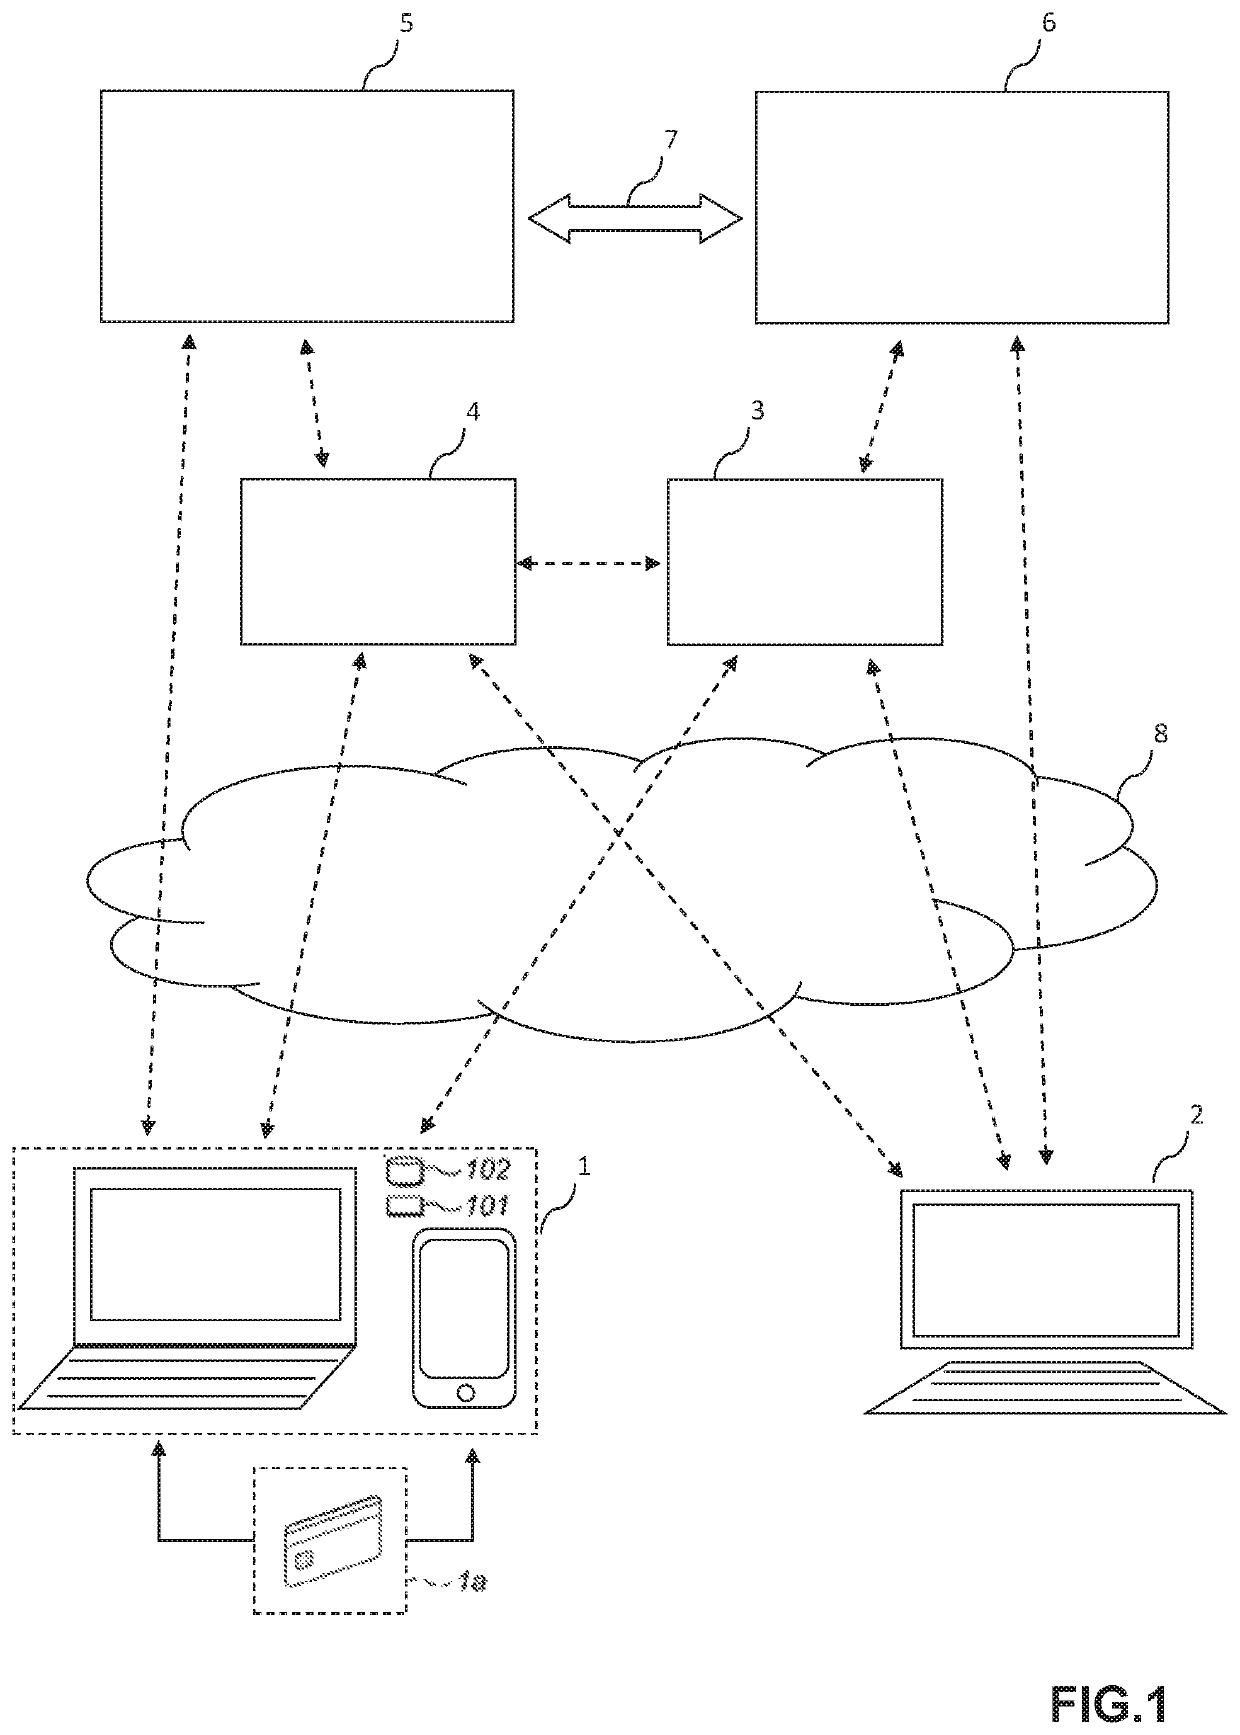 Security and authentication of interaction data